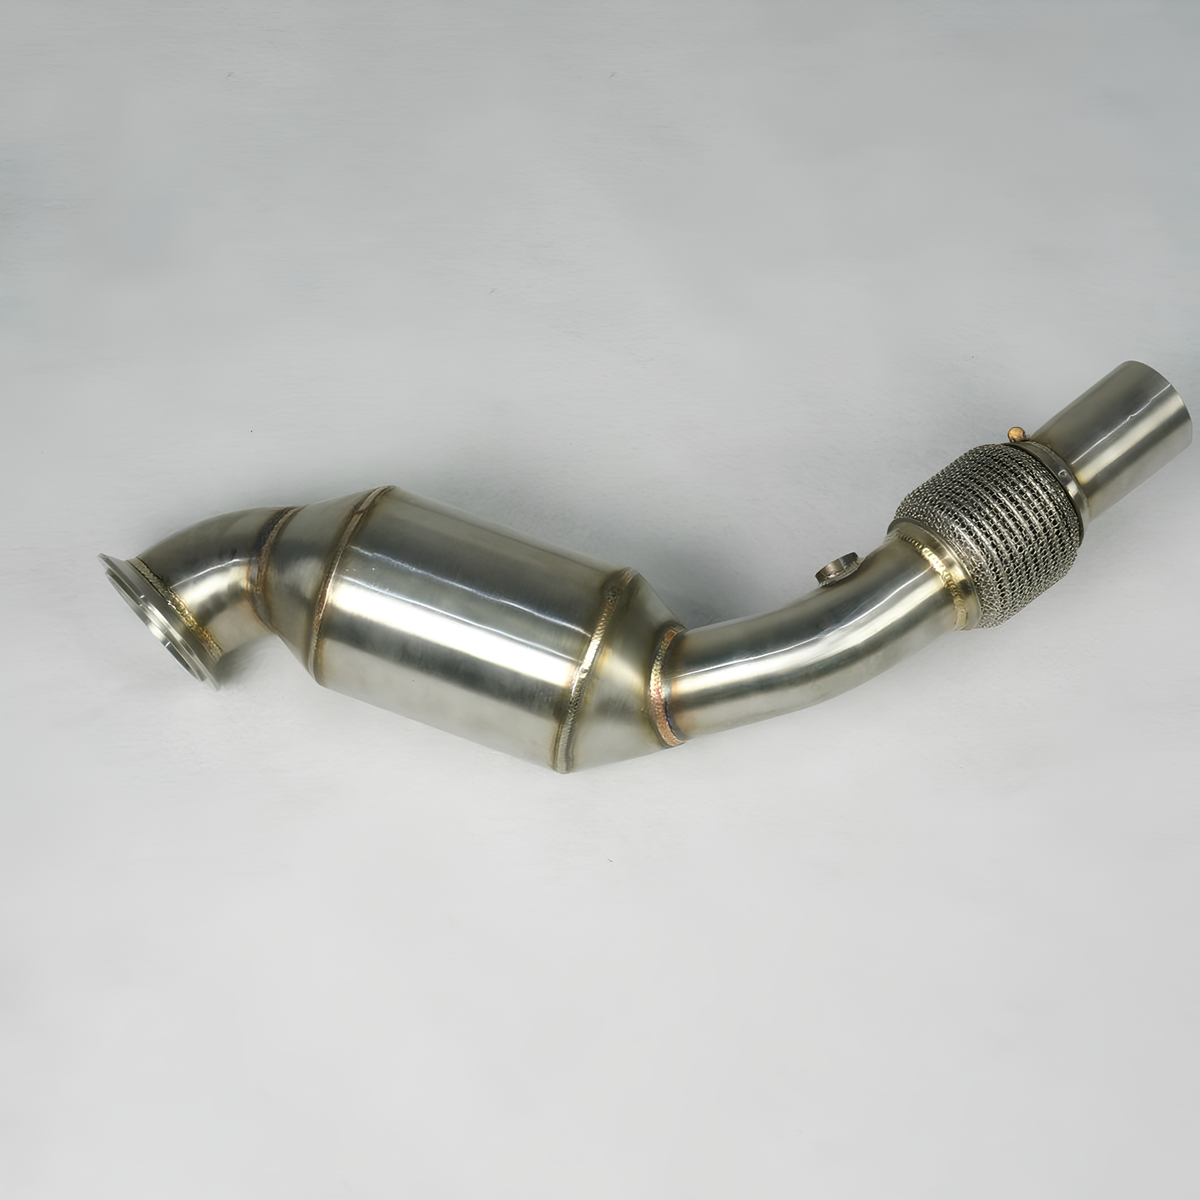 Rstype catless Downpipe For BMW F20 F21 114i 116i 118i N13 RWD 102PS 136PS 170PS 11-15